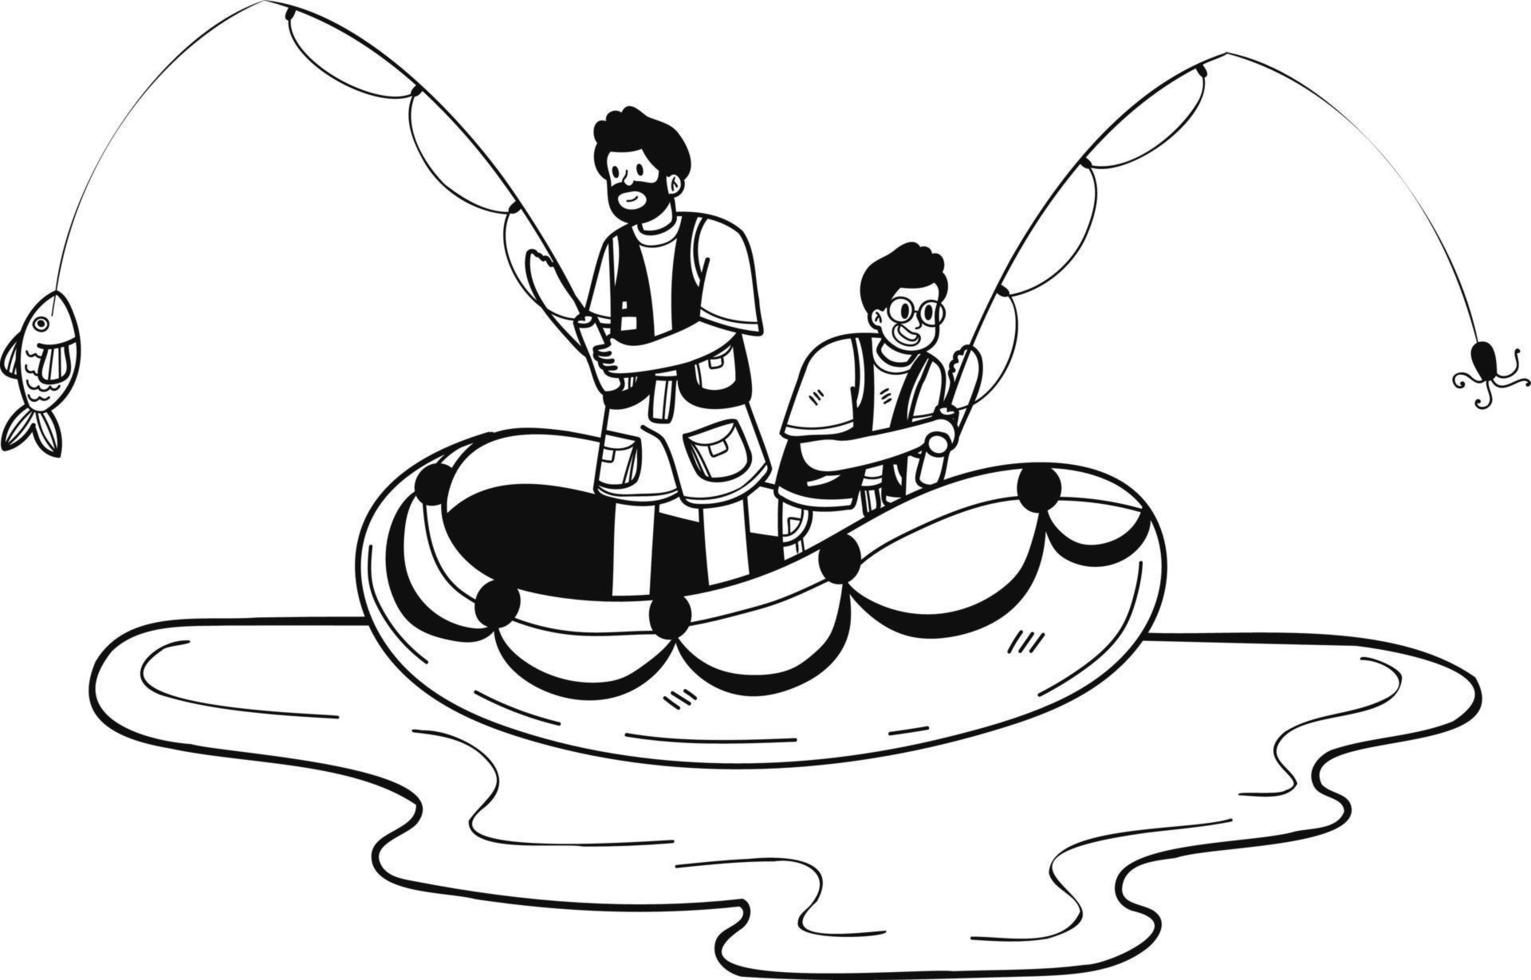 father and son fishing on a boat illustration in doodle style vector